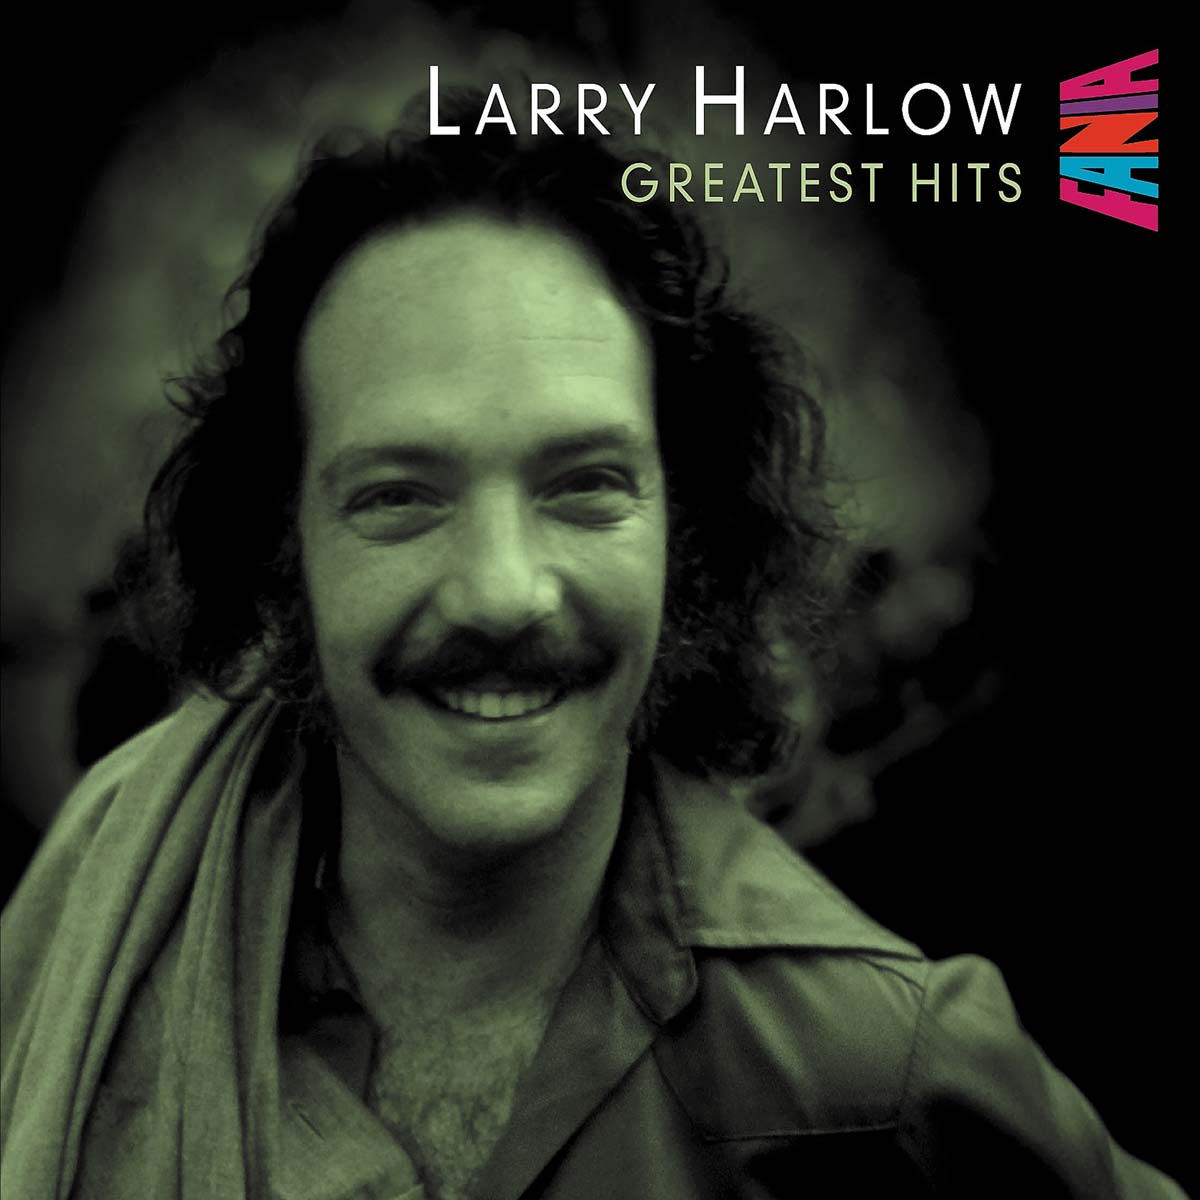 Featured Image for “LARRY HARLOW GREATEST HITS”